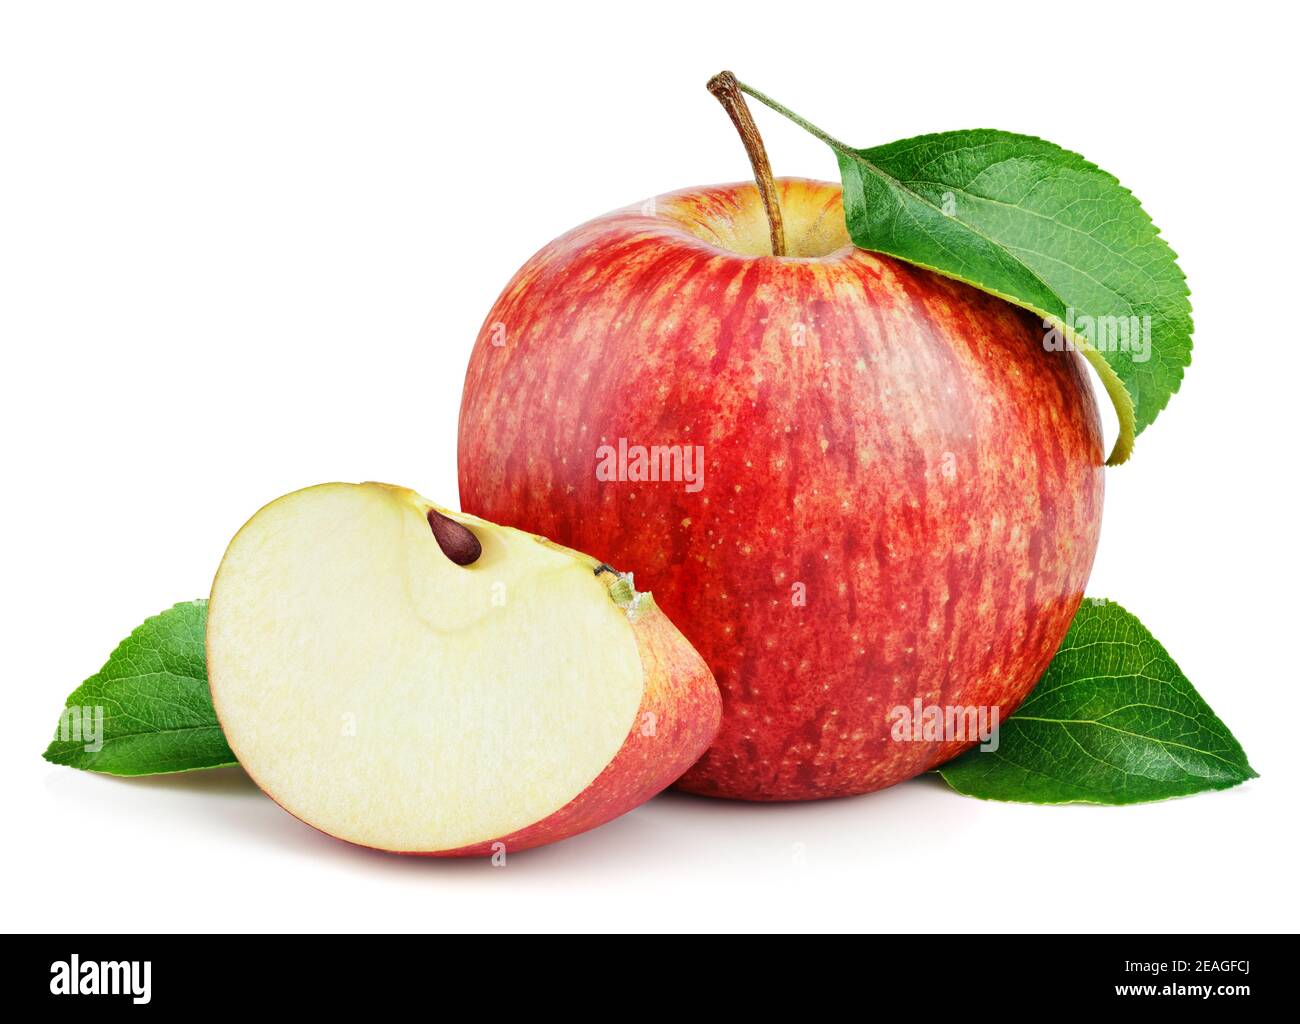 Ripe red apple fruit with slice and green leaves isolated on white background. Red apples and leaves with clipping path Stock Photo